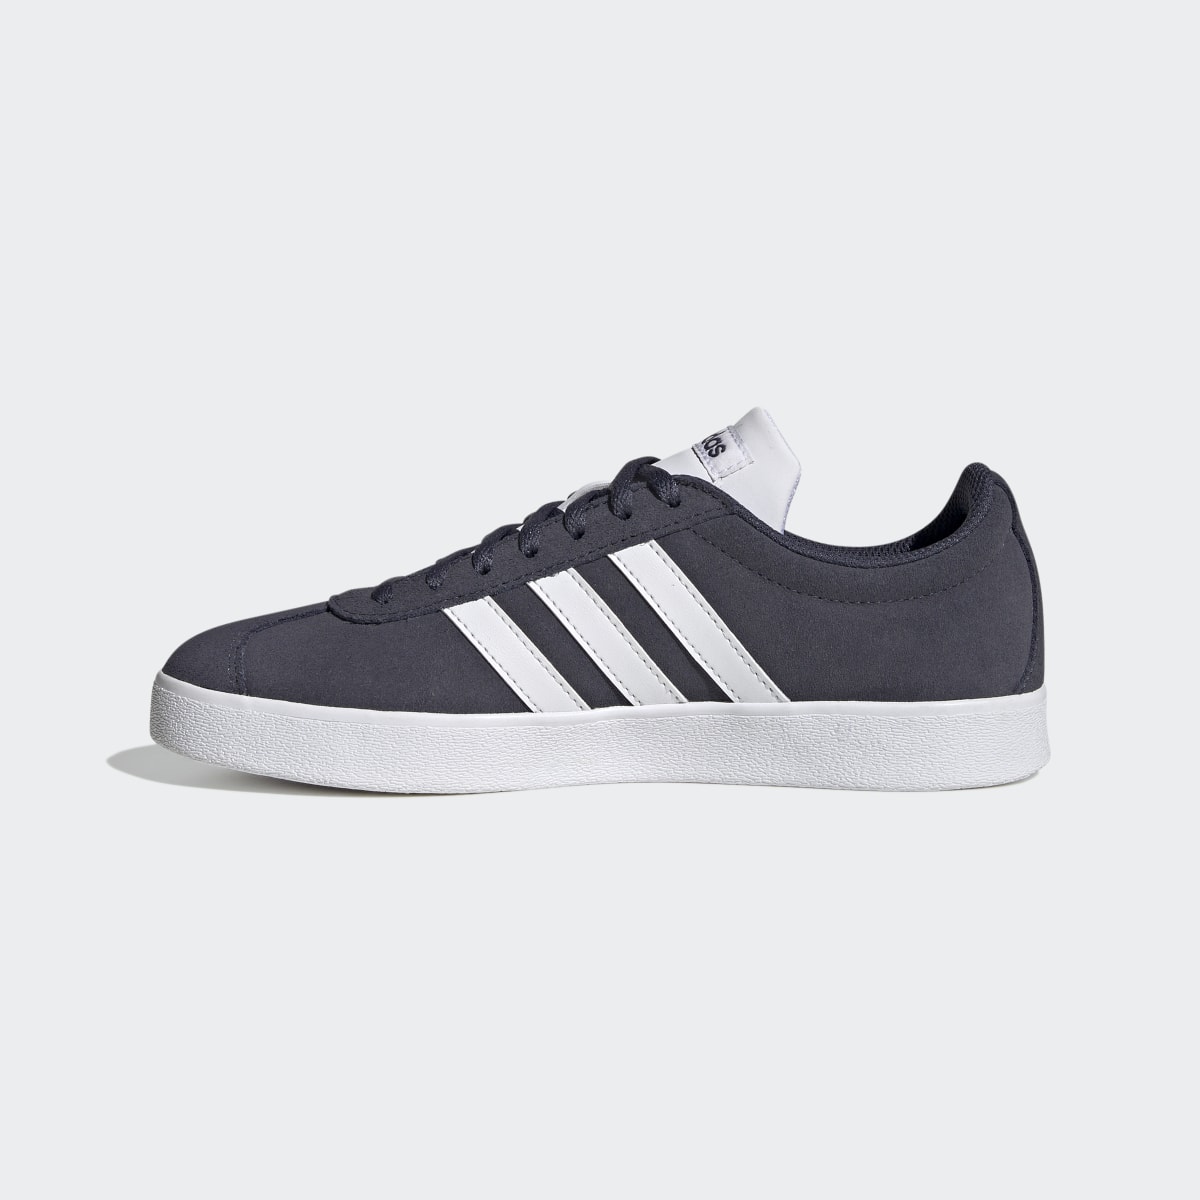 Adidas VL Court 2.0 Suede Shoes. 7